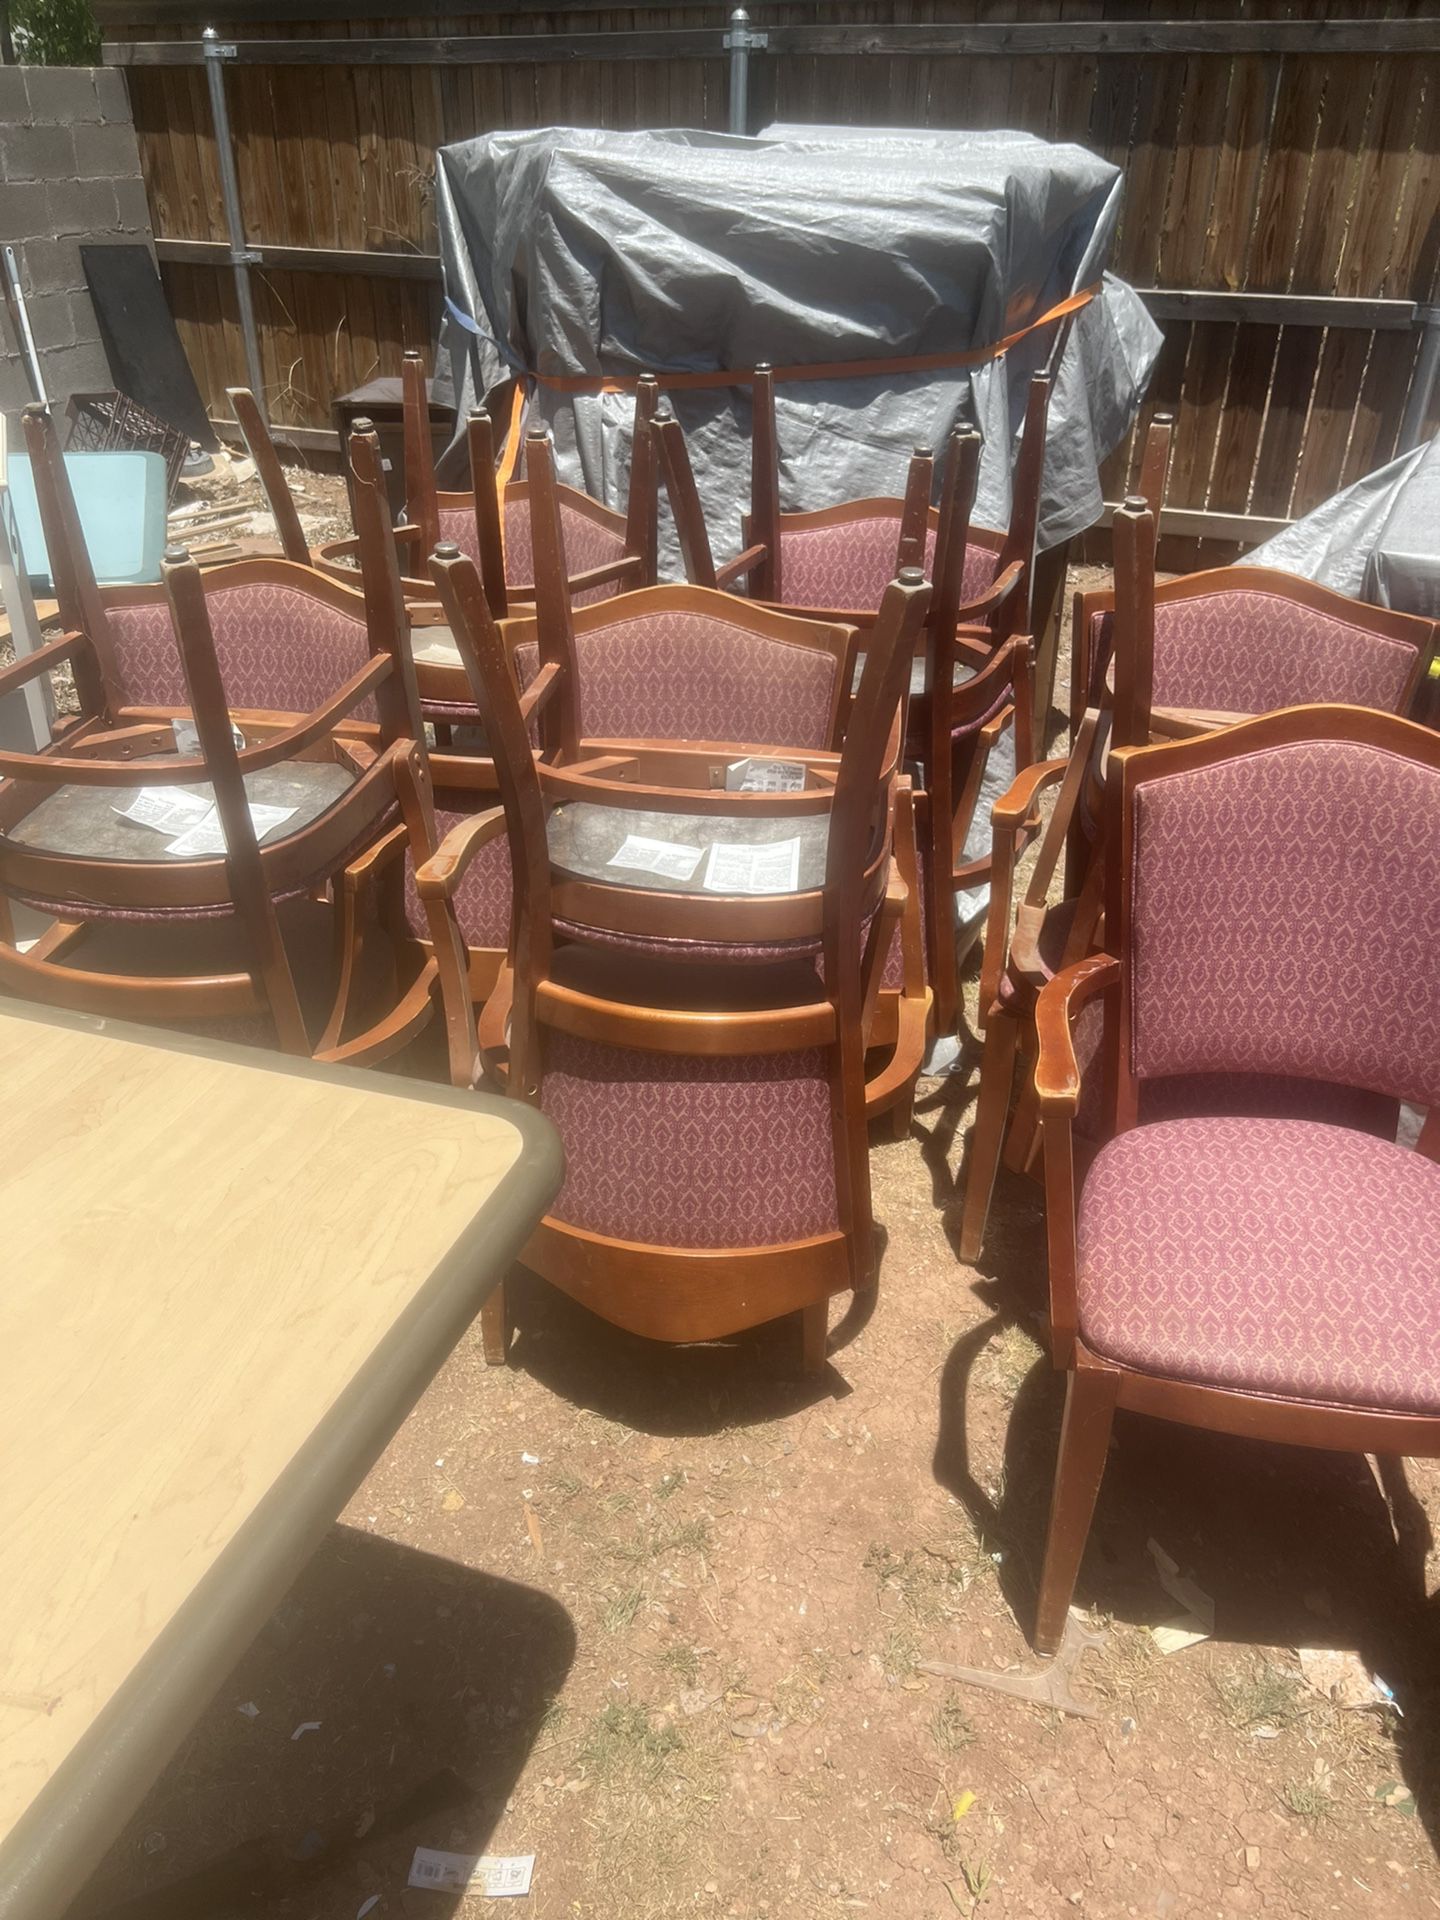 11 Chairs. In Good Shape But Dusty From Being In Storage 